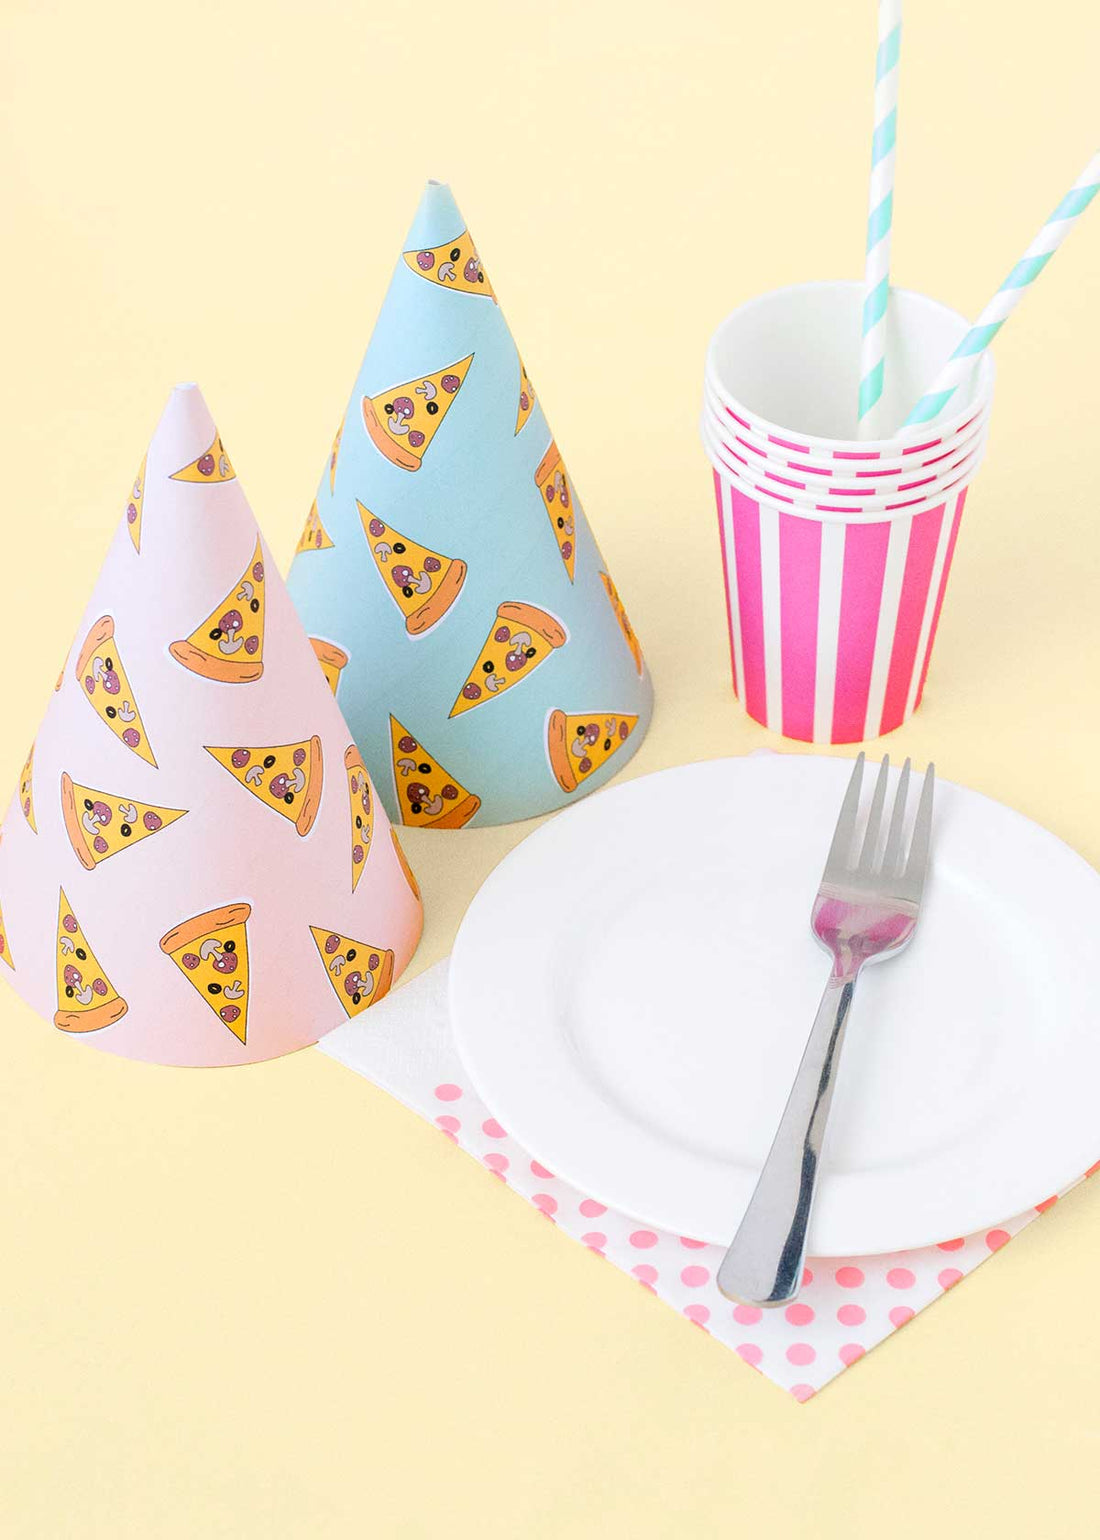 Newsletter freebie - pizza party hats